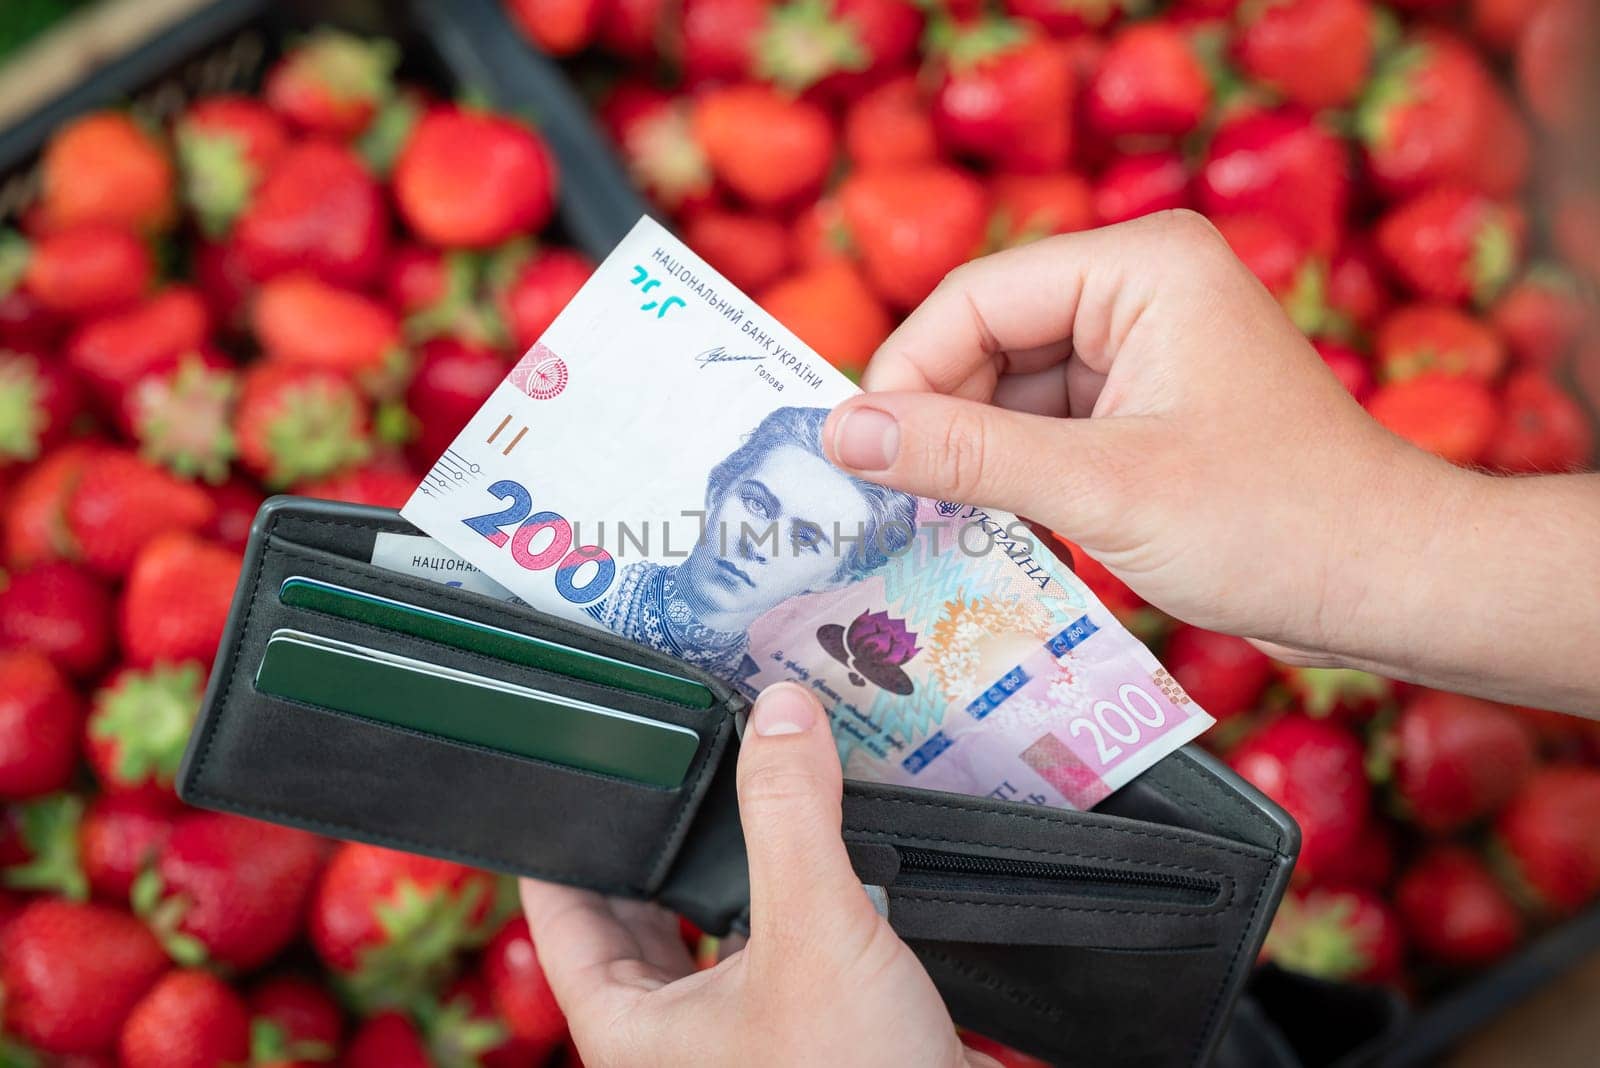 Girl buying strawberry at the market and taking 200 hryvnias from the purse by VitaliiPetrushenko